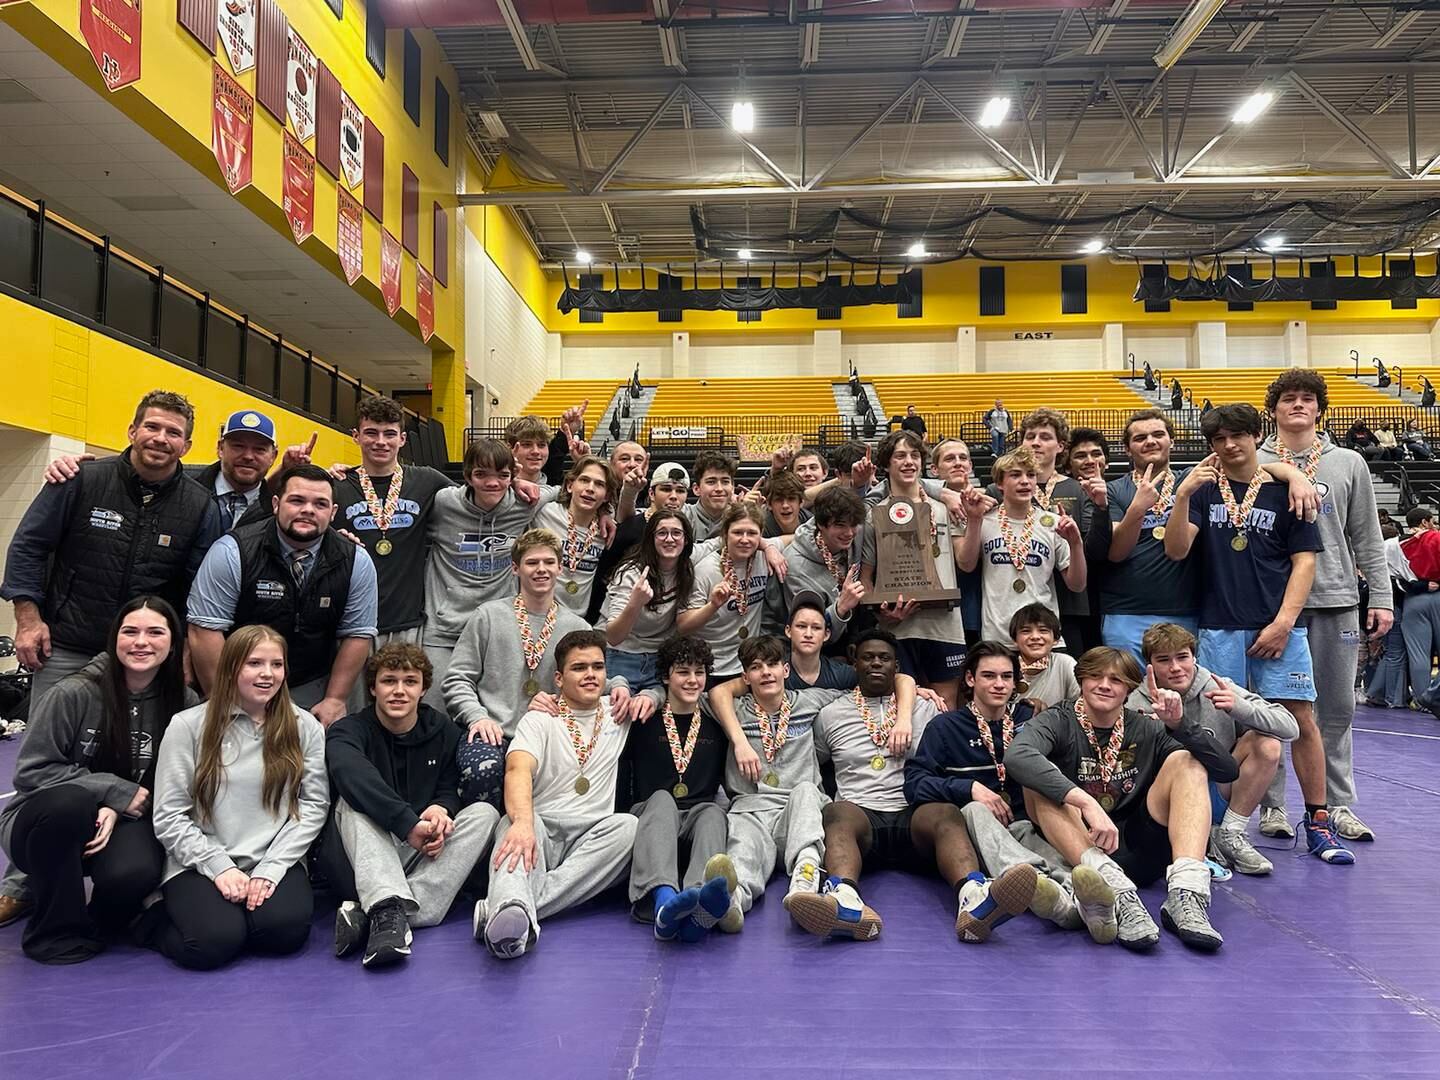 The South River wrestling team overcame some in-season setbacks to peak during the Class 4A state duals tournament. The Seahawks completed their run to a second consecutive state crown with wins over Sherwood and Urbana on Saturday.